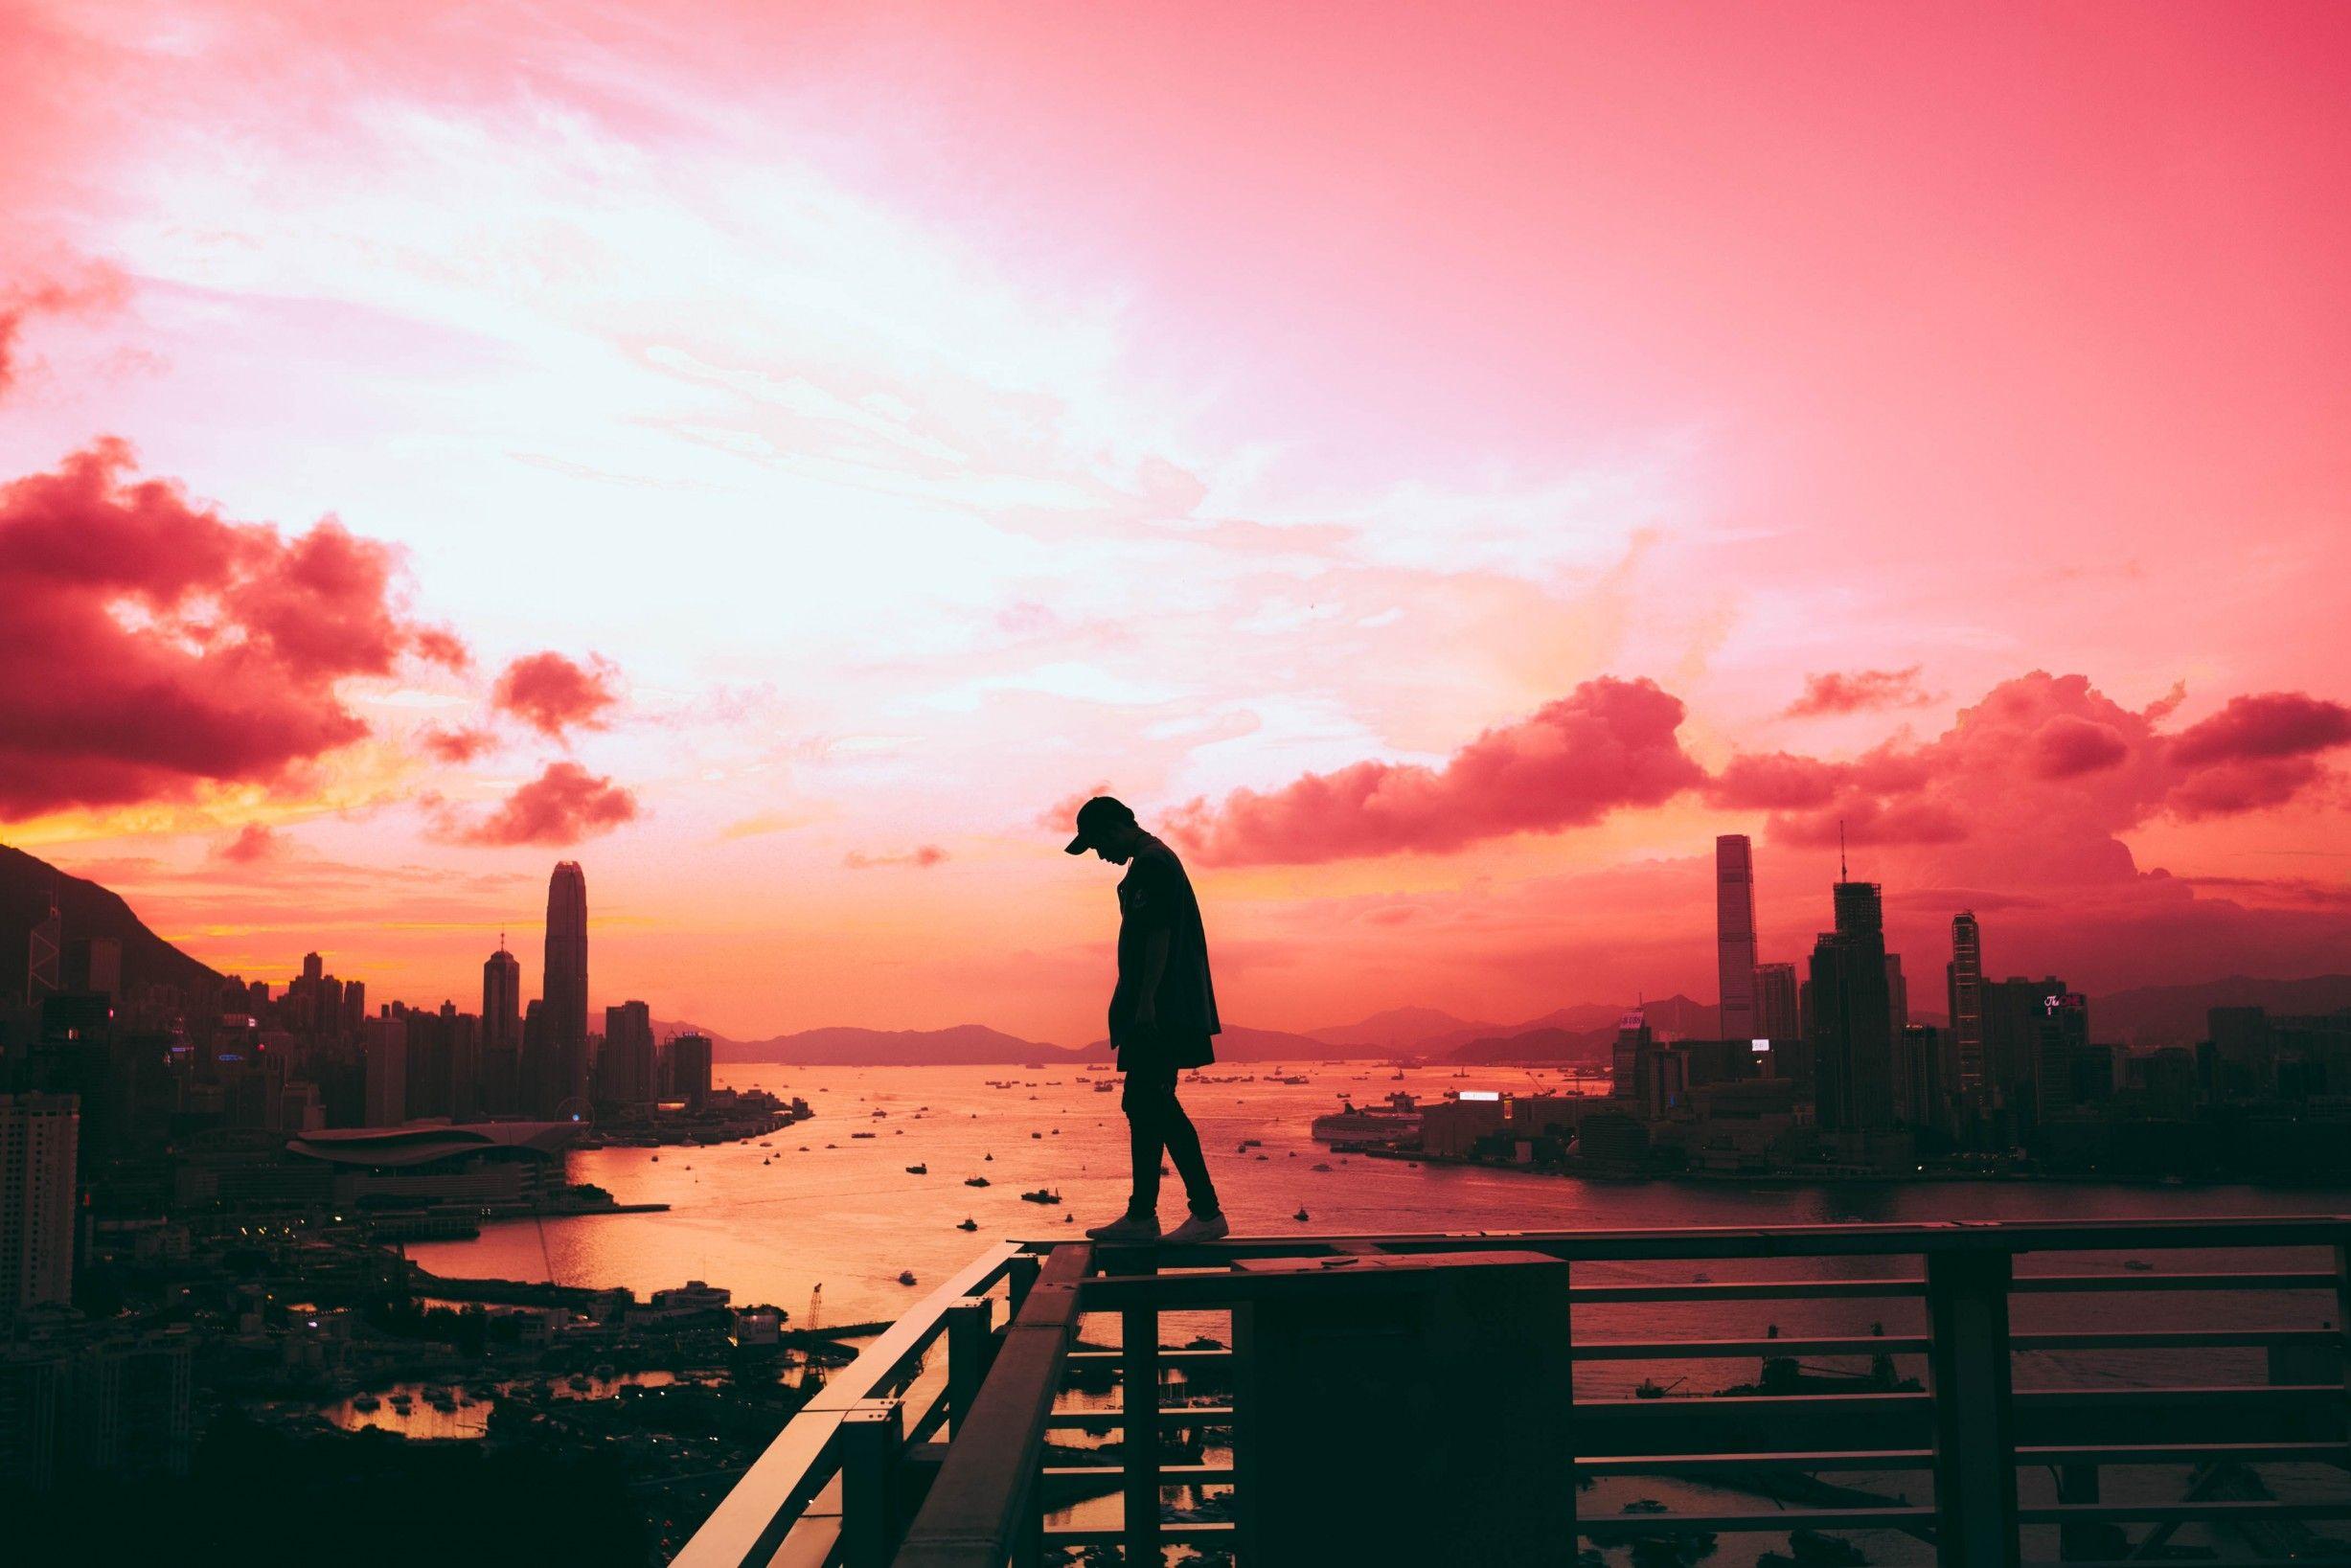 Download 2454x1637 Standing On The Edge, Man, Sunset, City